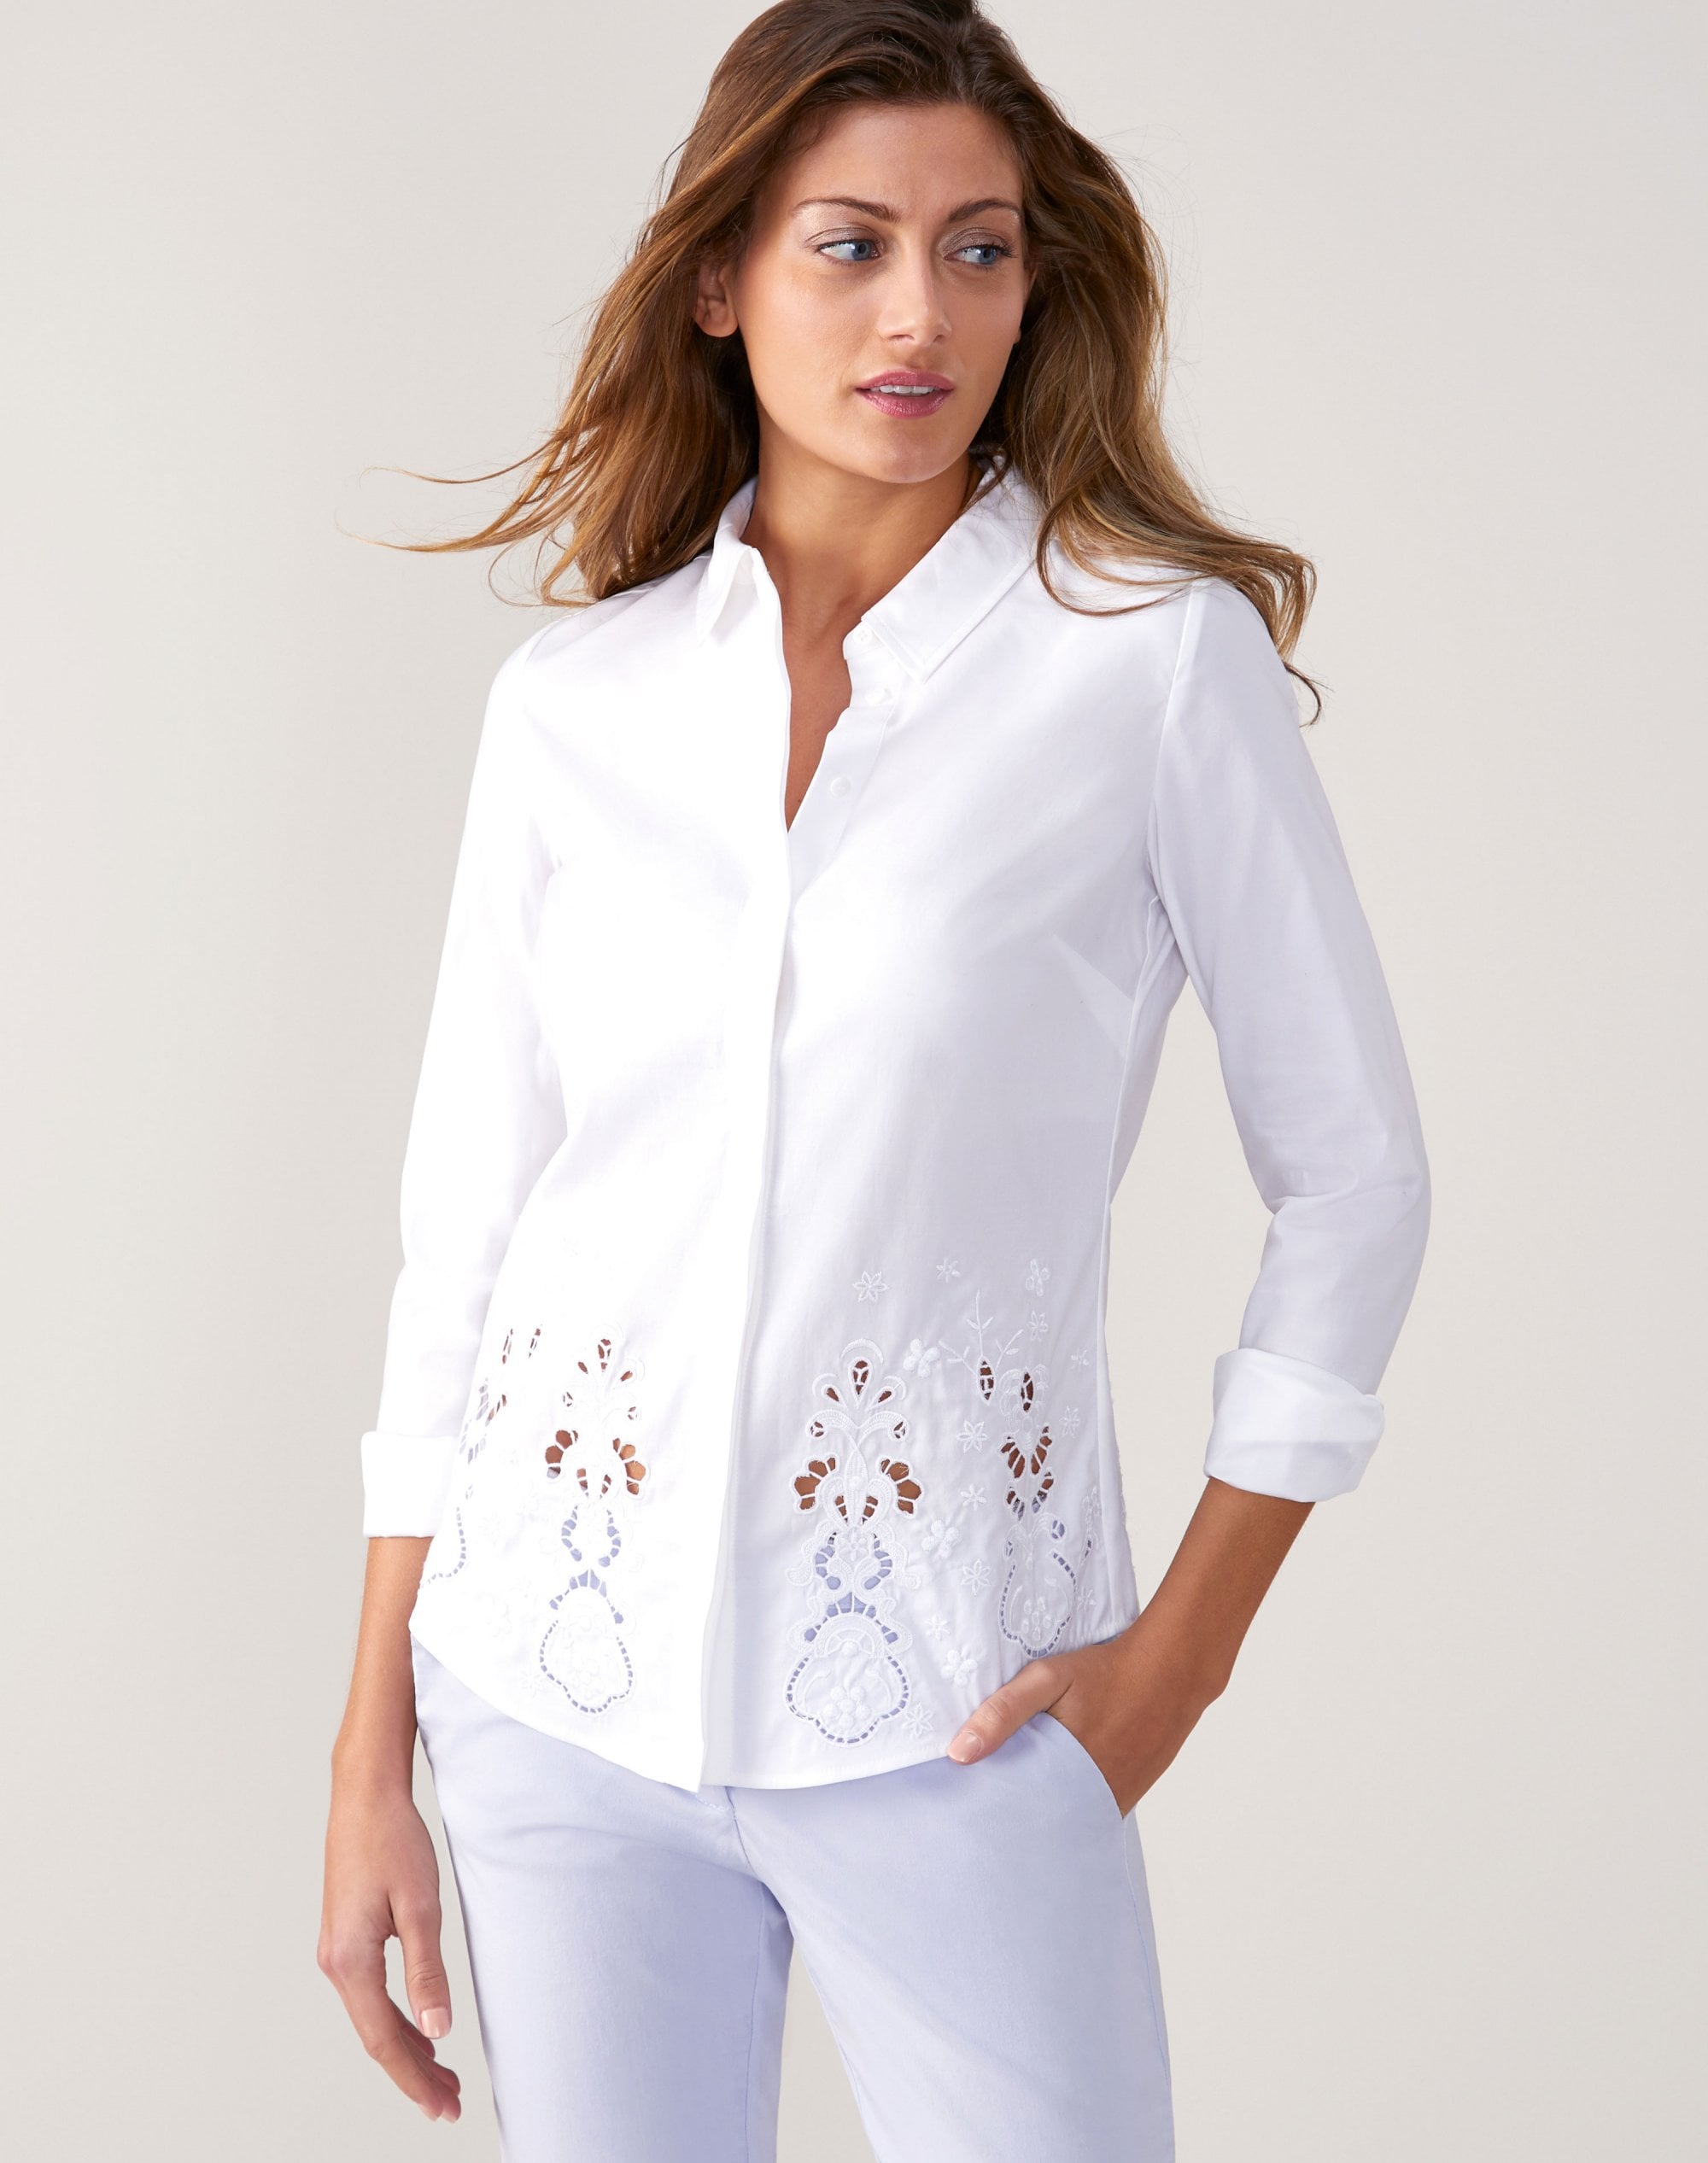 Cotton Embroidered Shirt White P4606 8363zoom Fashion And Lifestyle